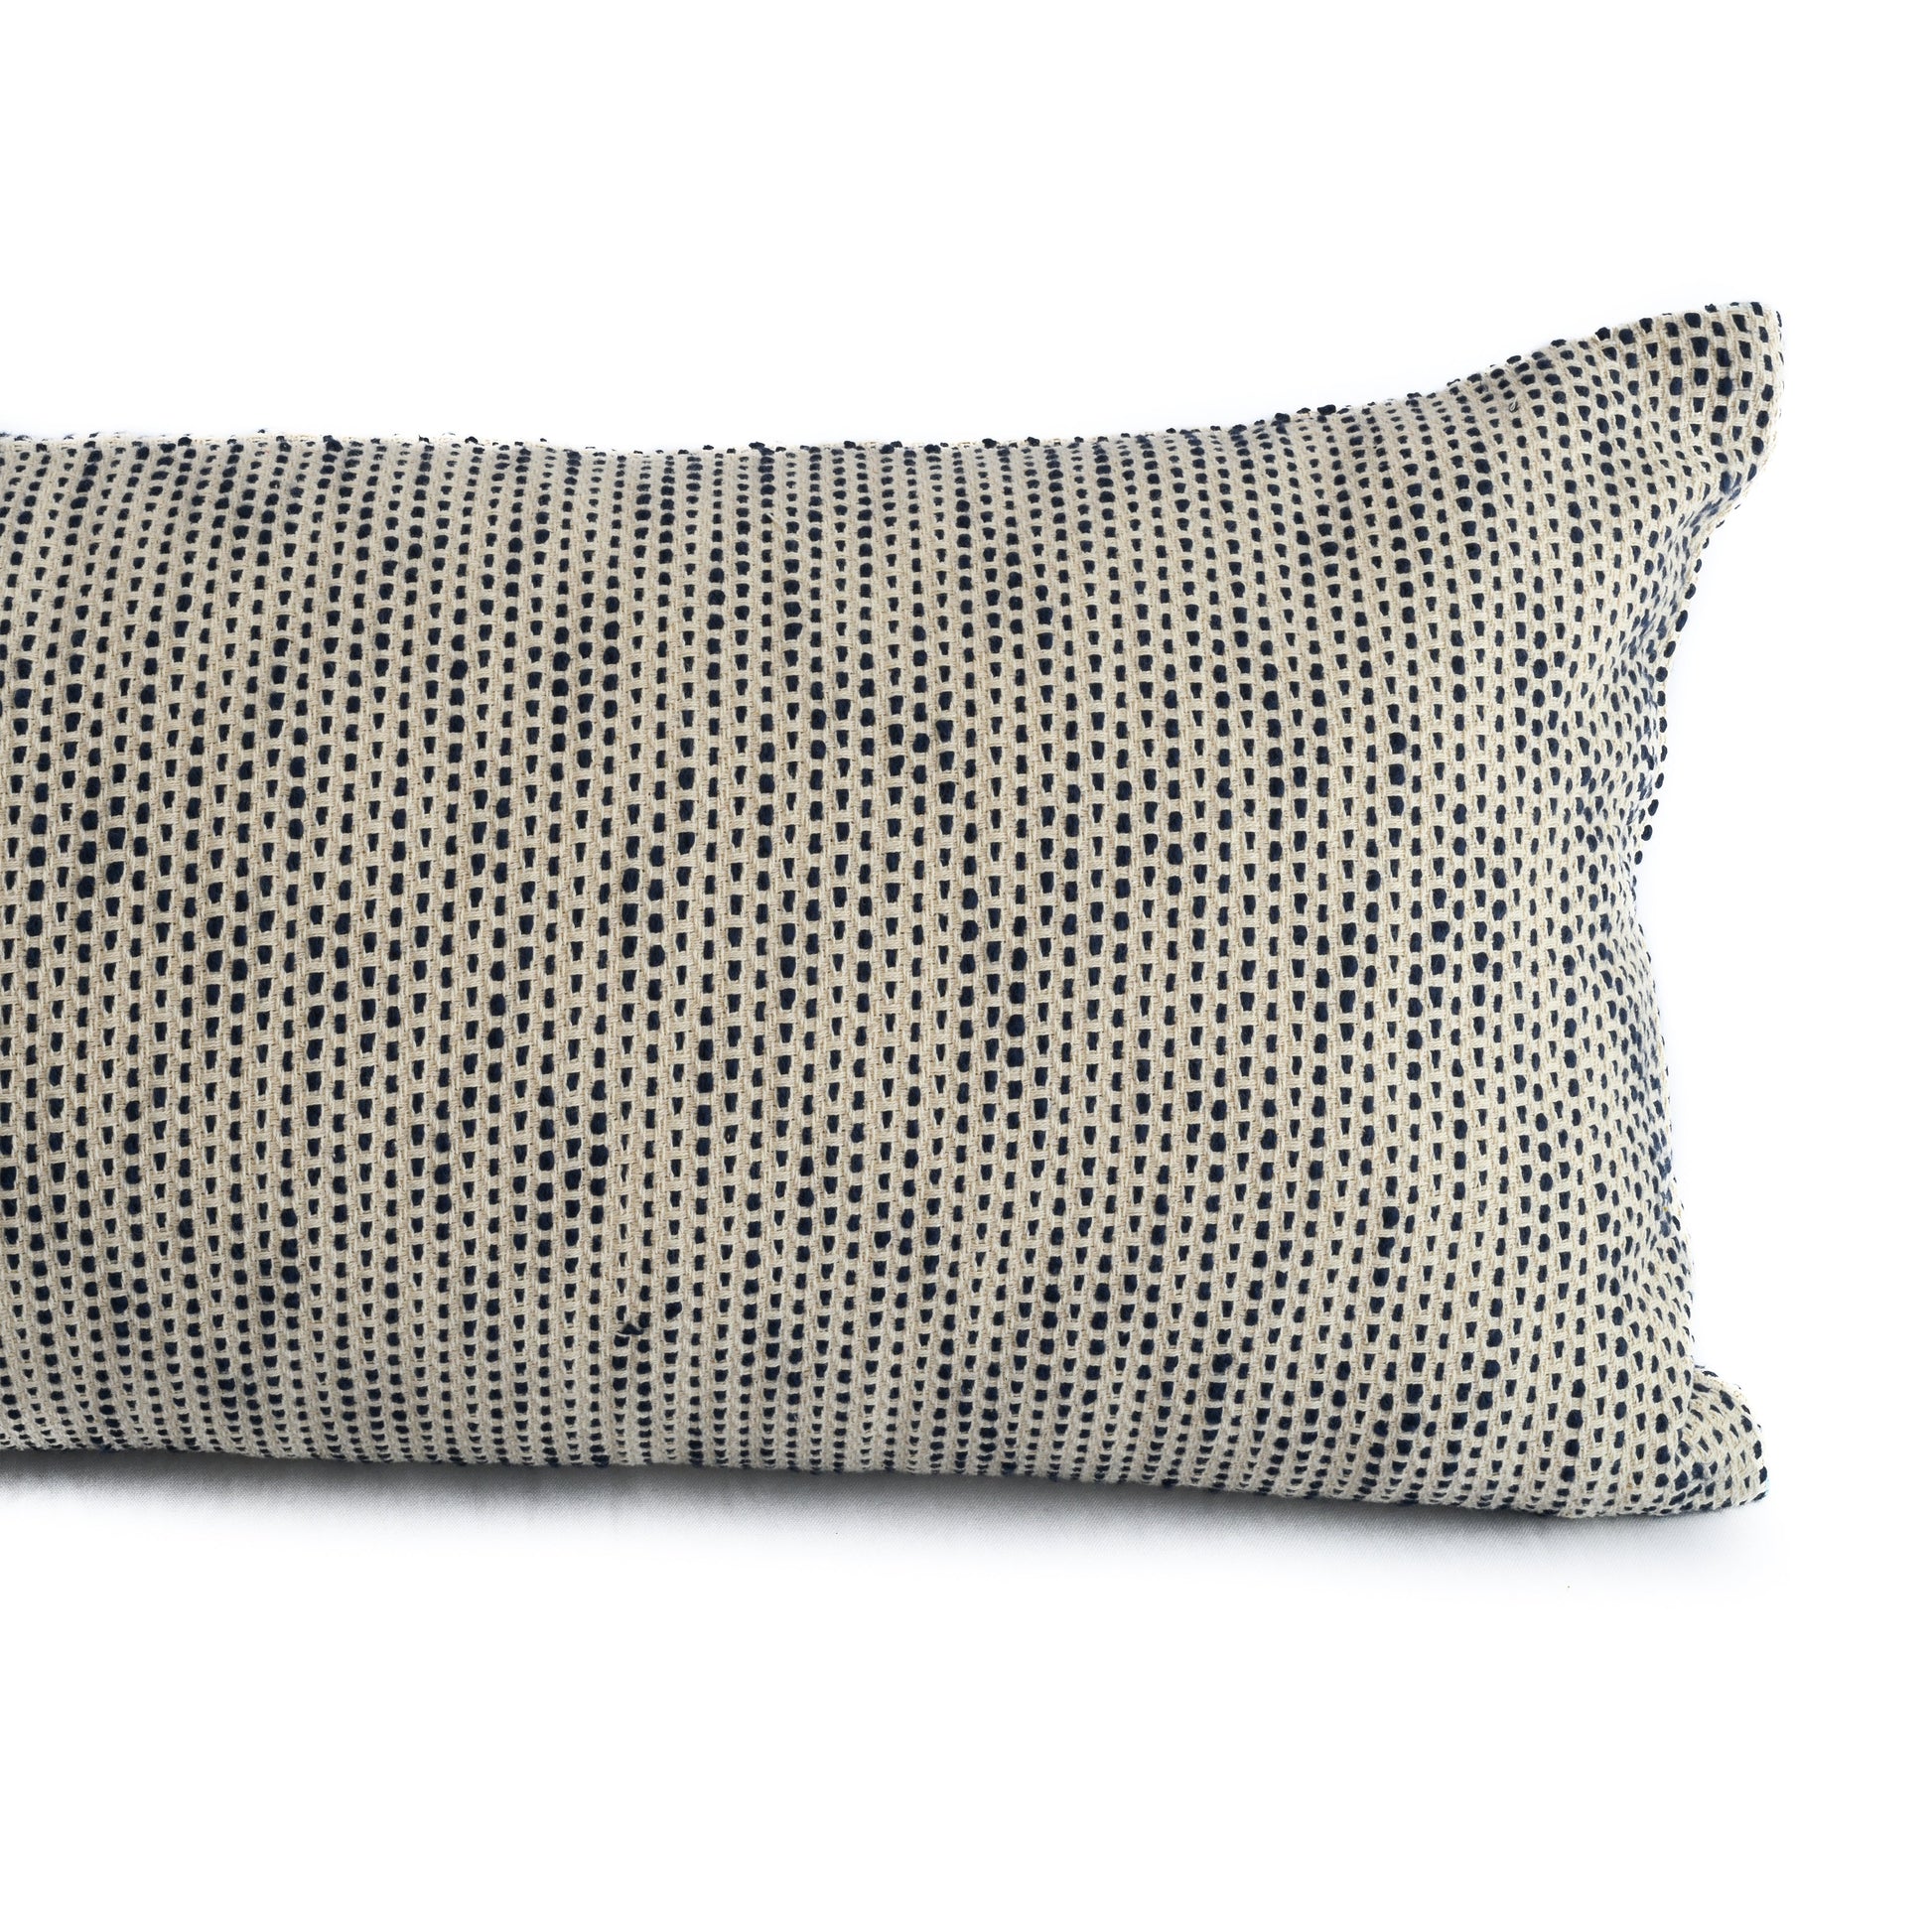 Close up of a Hand woven cotton extra long lumbar cushion cover in a navy blue colour